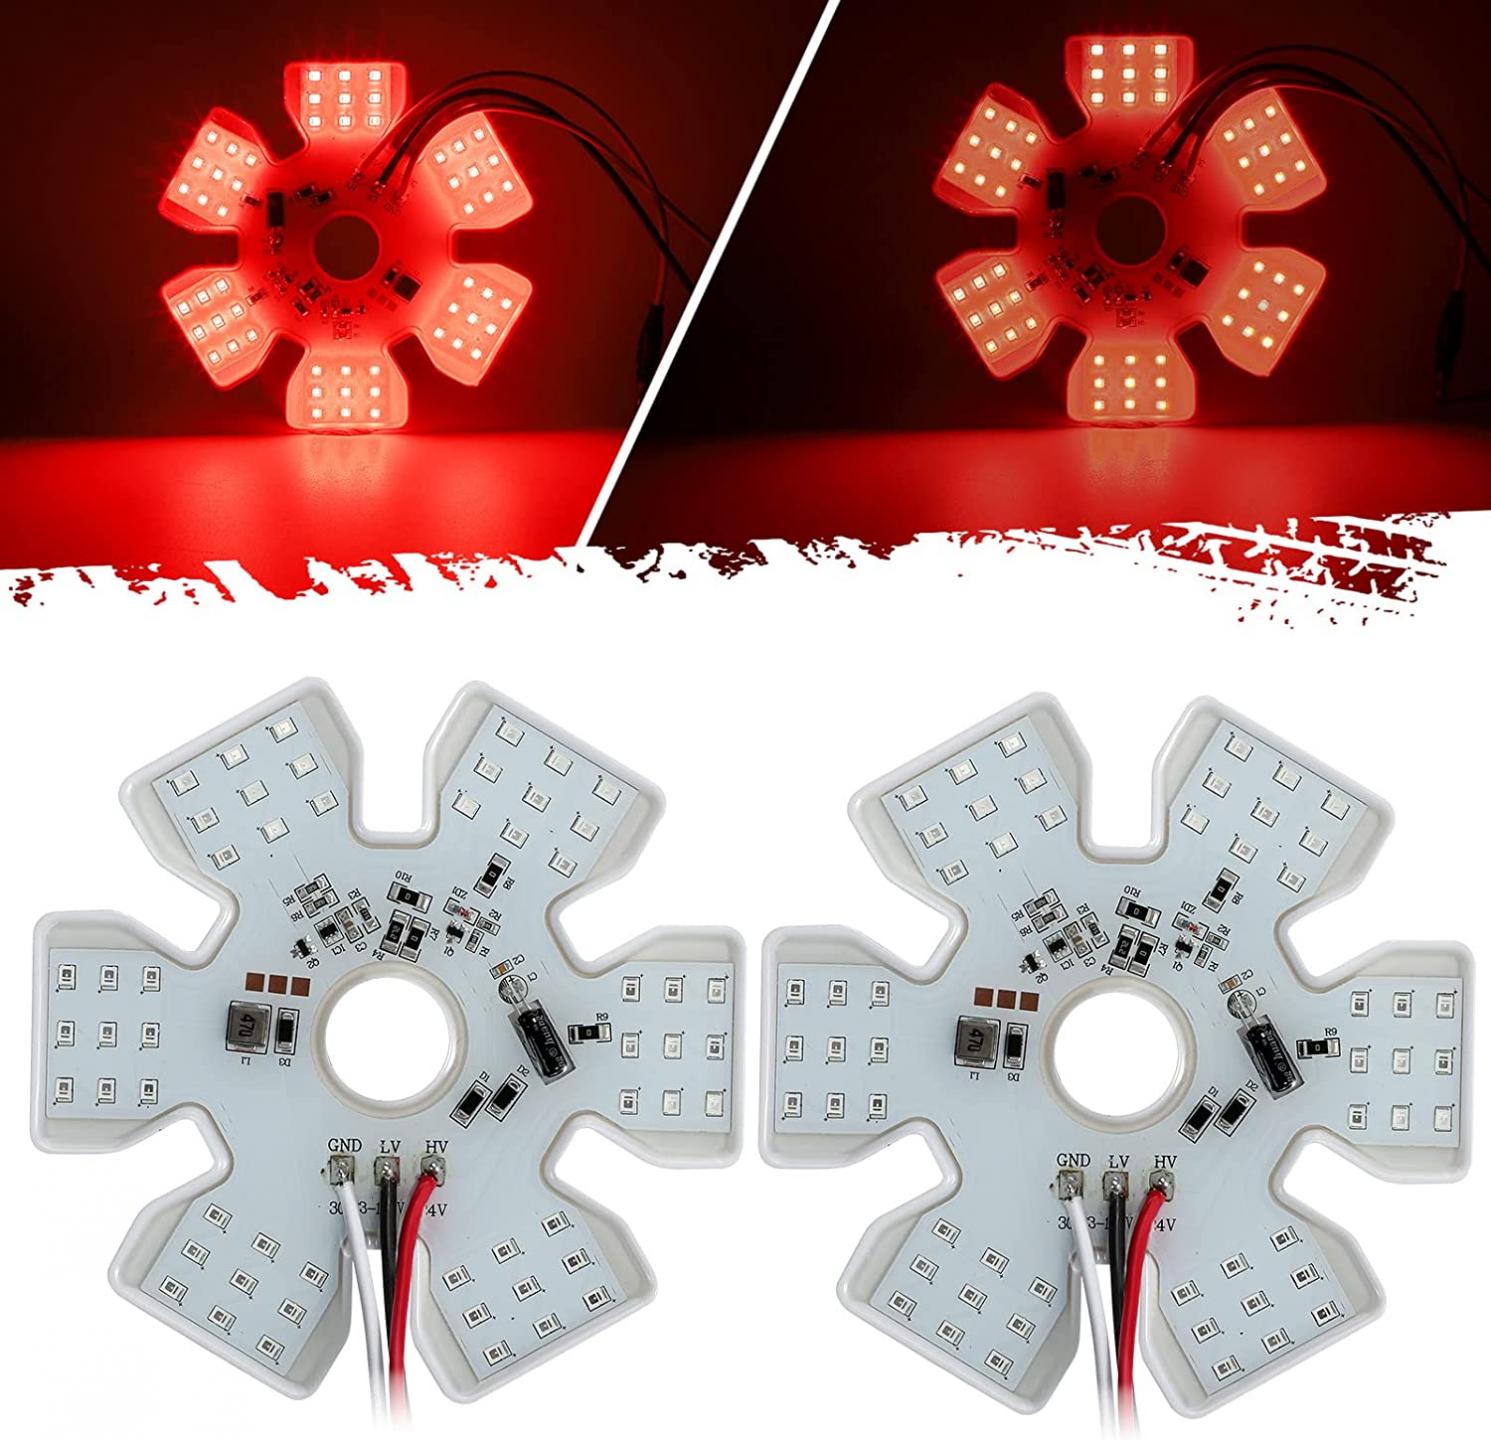 Partsam 2Pcs Ultra-Thin Hex Style Dual Function Interior 54 LED Air Breather Light 4.8" Decorative Air Cleaner Lamp for Peterbilt Kenworth Freightliner Trucks, Trailers, RV IP67 10-30V (Red)